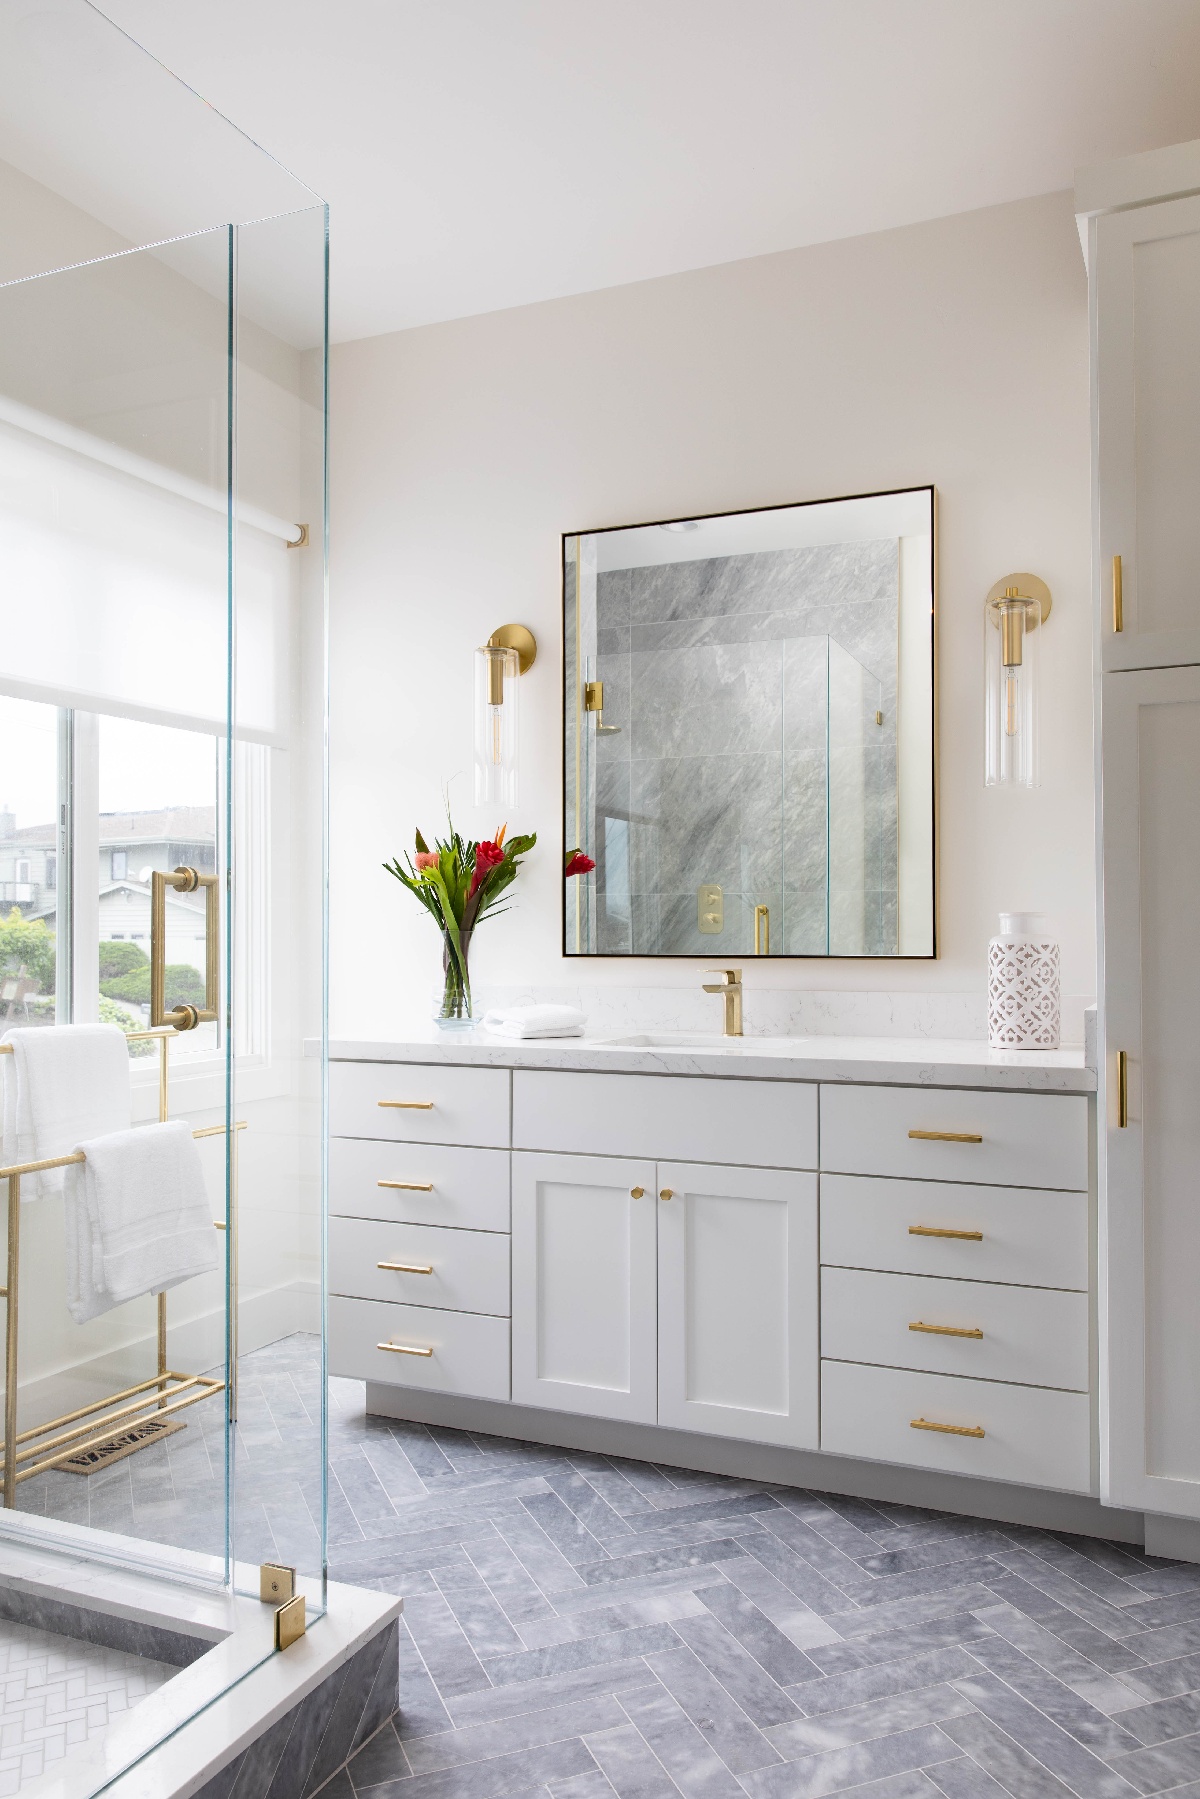 Bathroom mirror with white cabinetry and storage